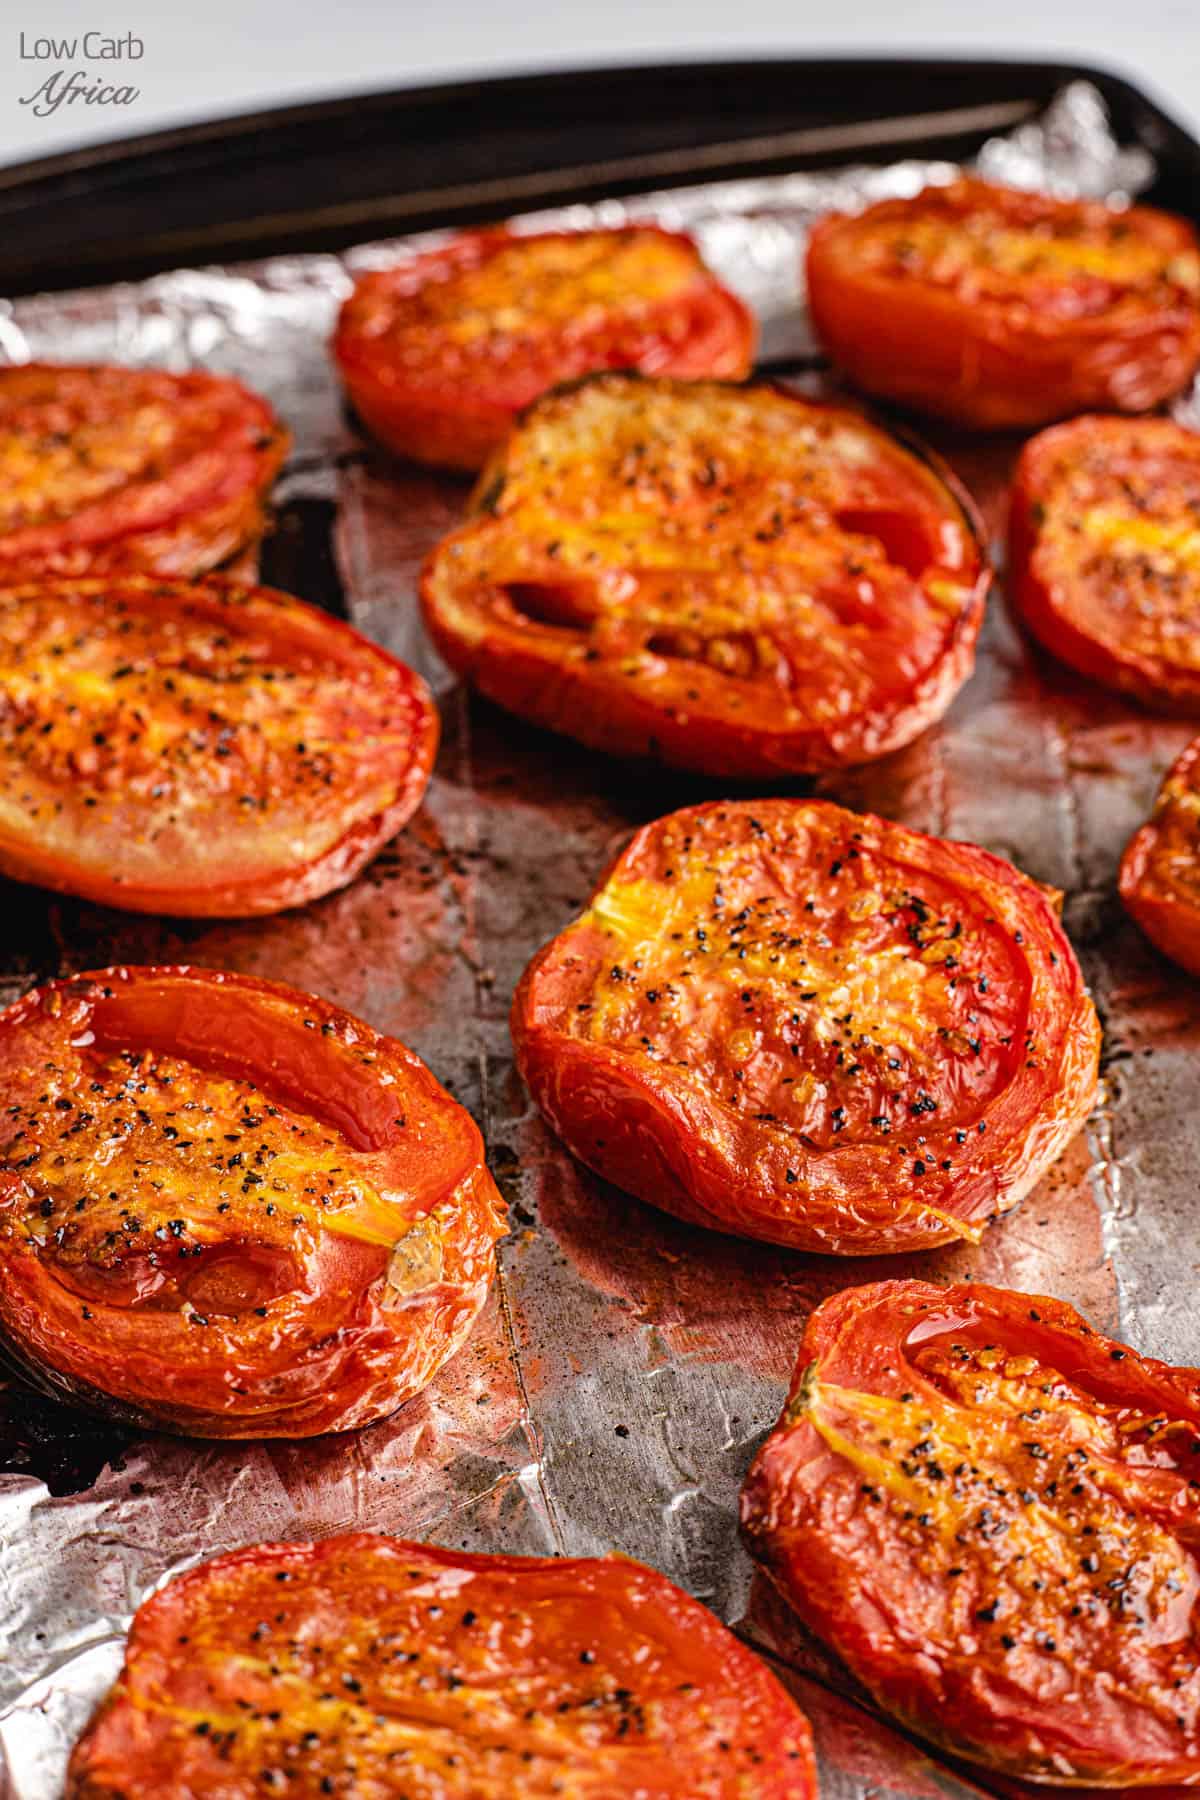 Fire Roasted Tomatoes - Low Carb Africa